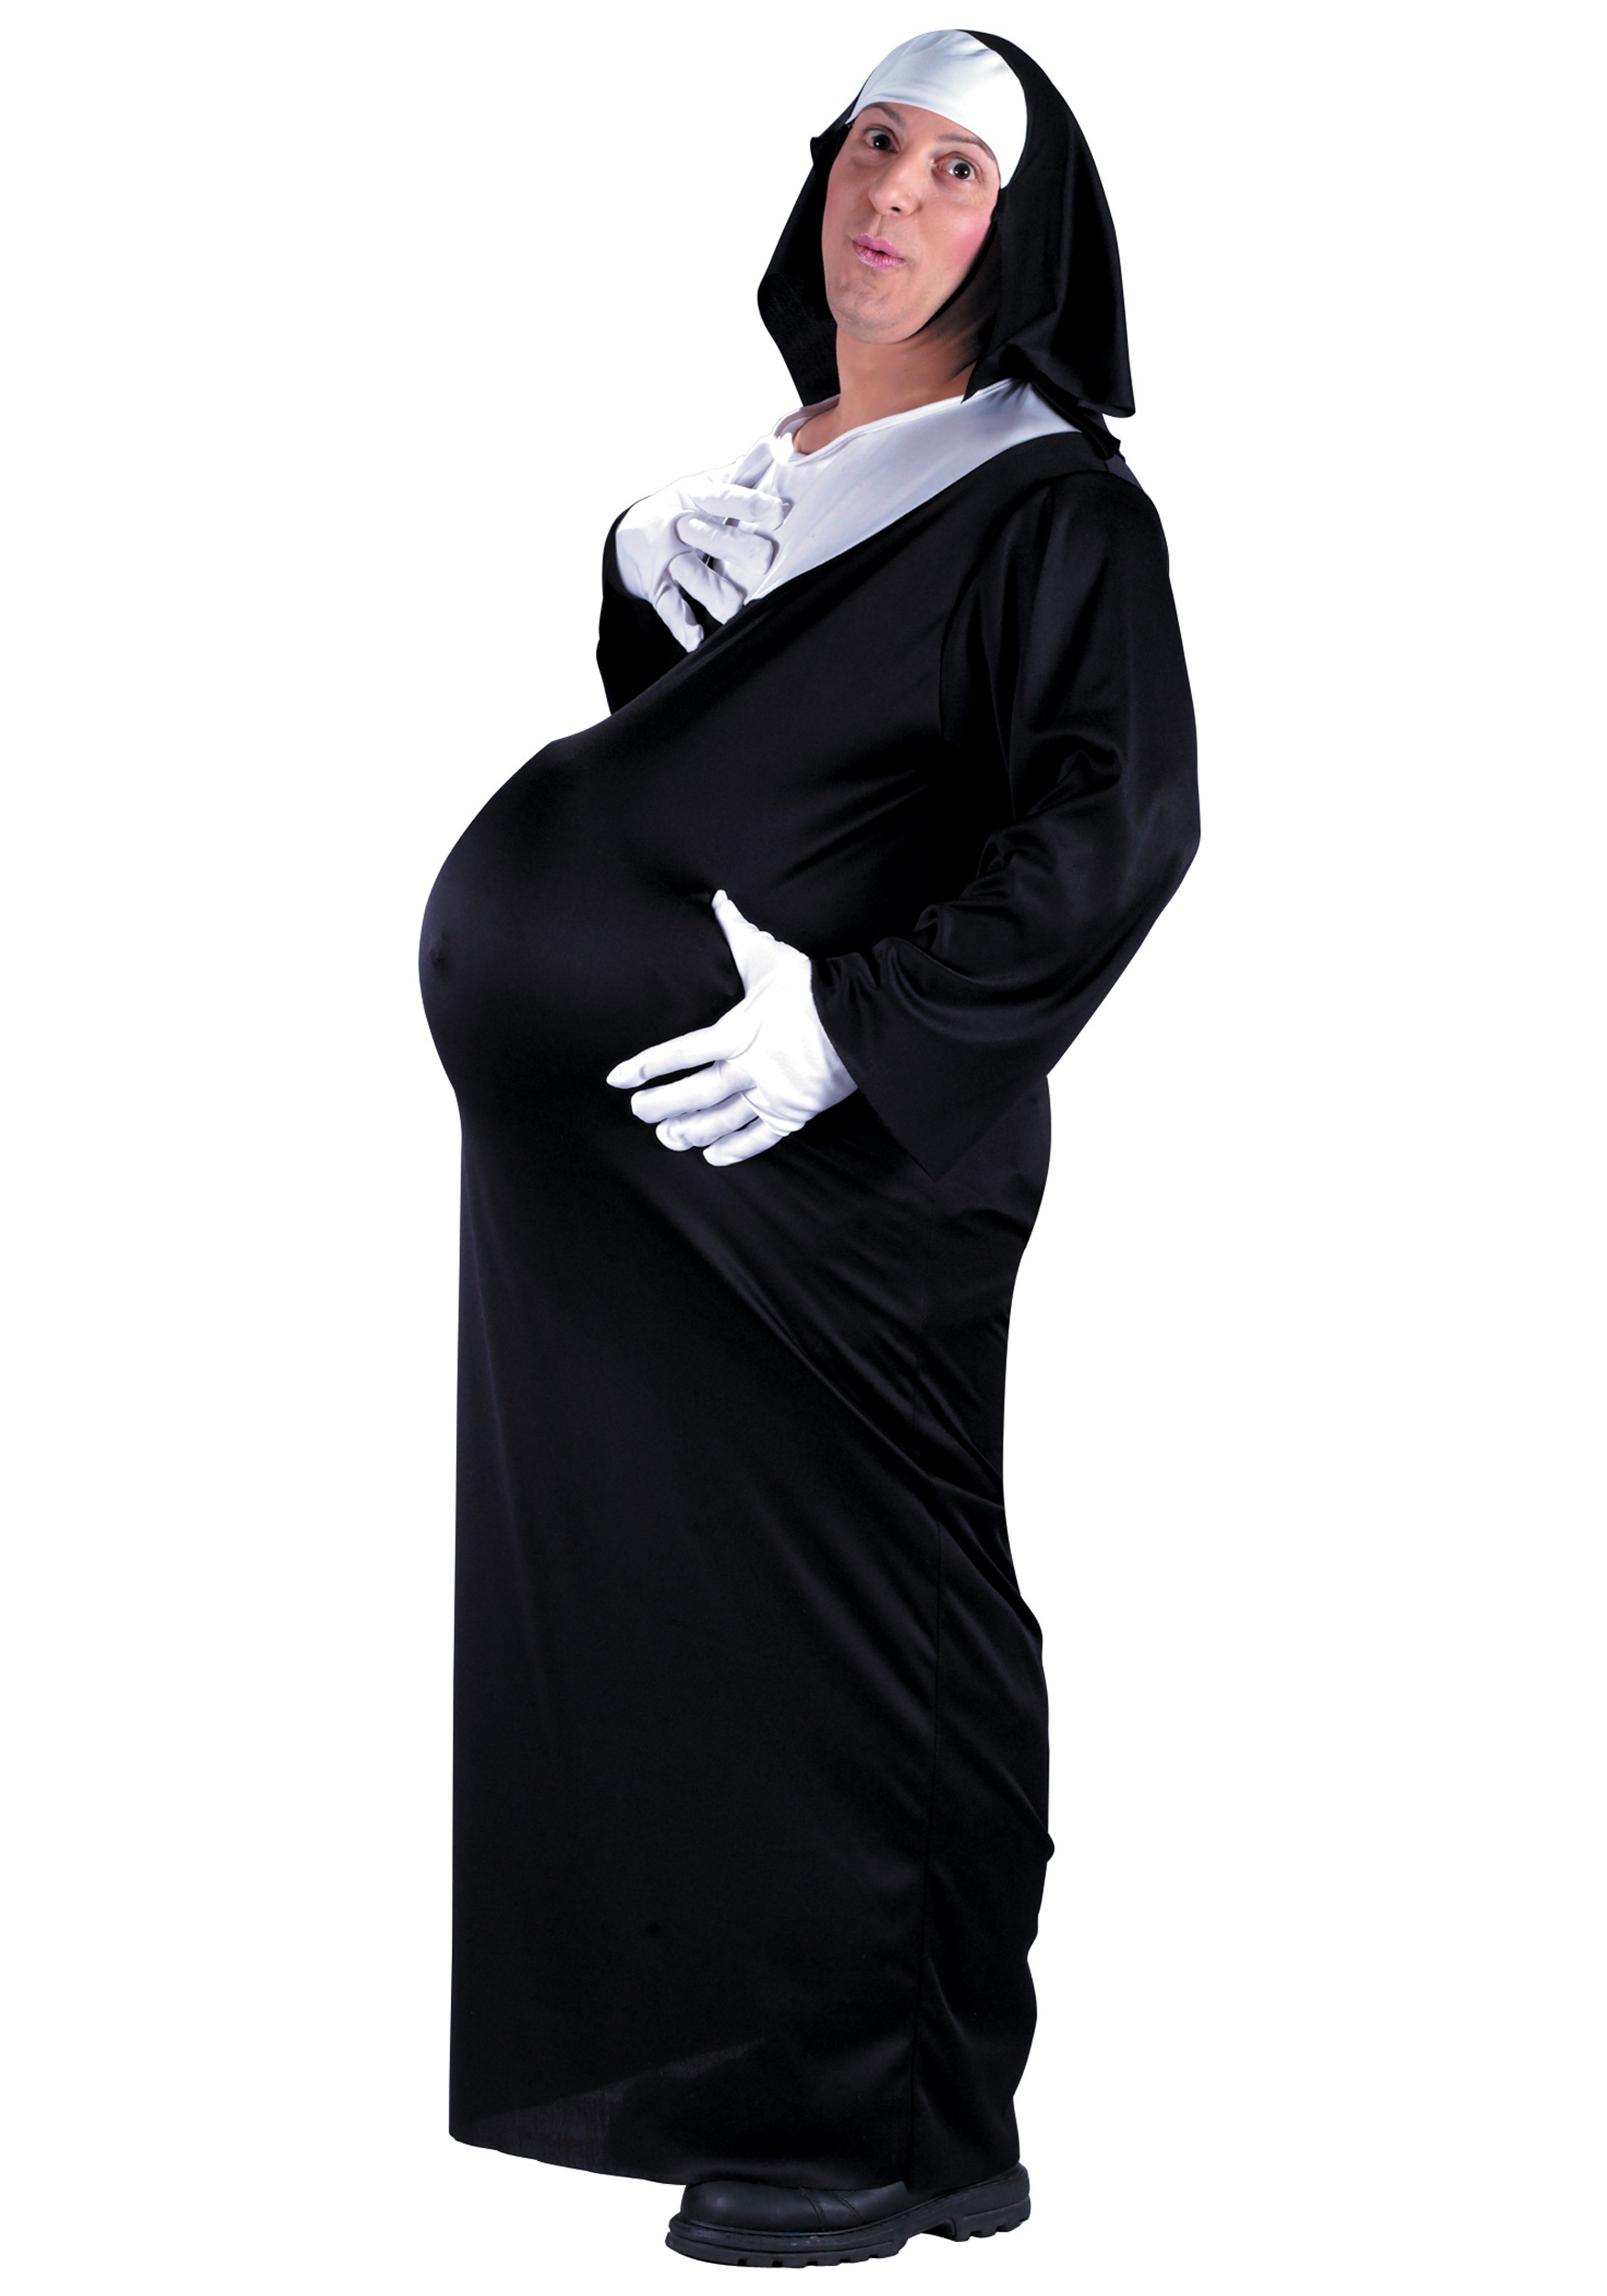 Nun Costume Womens ladies Fancy Dress Holy Religious Habit Outfit Dressup Hen 